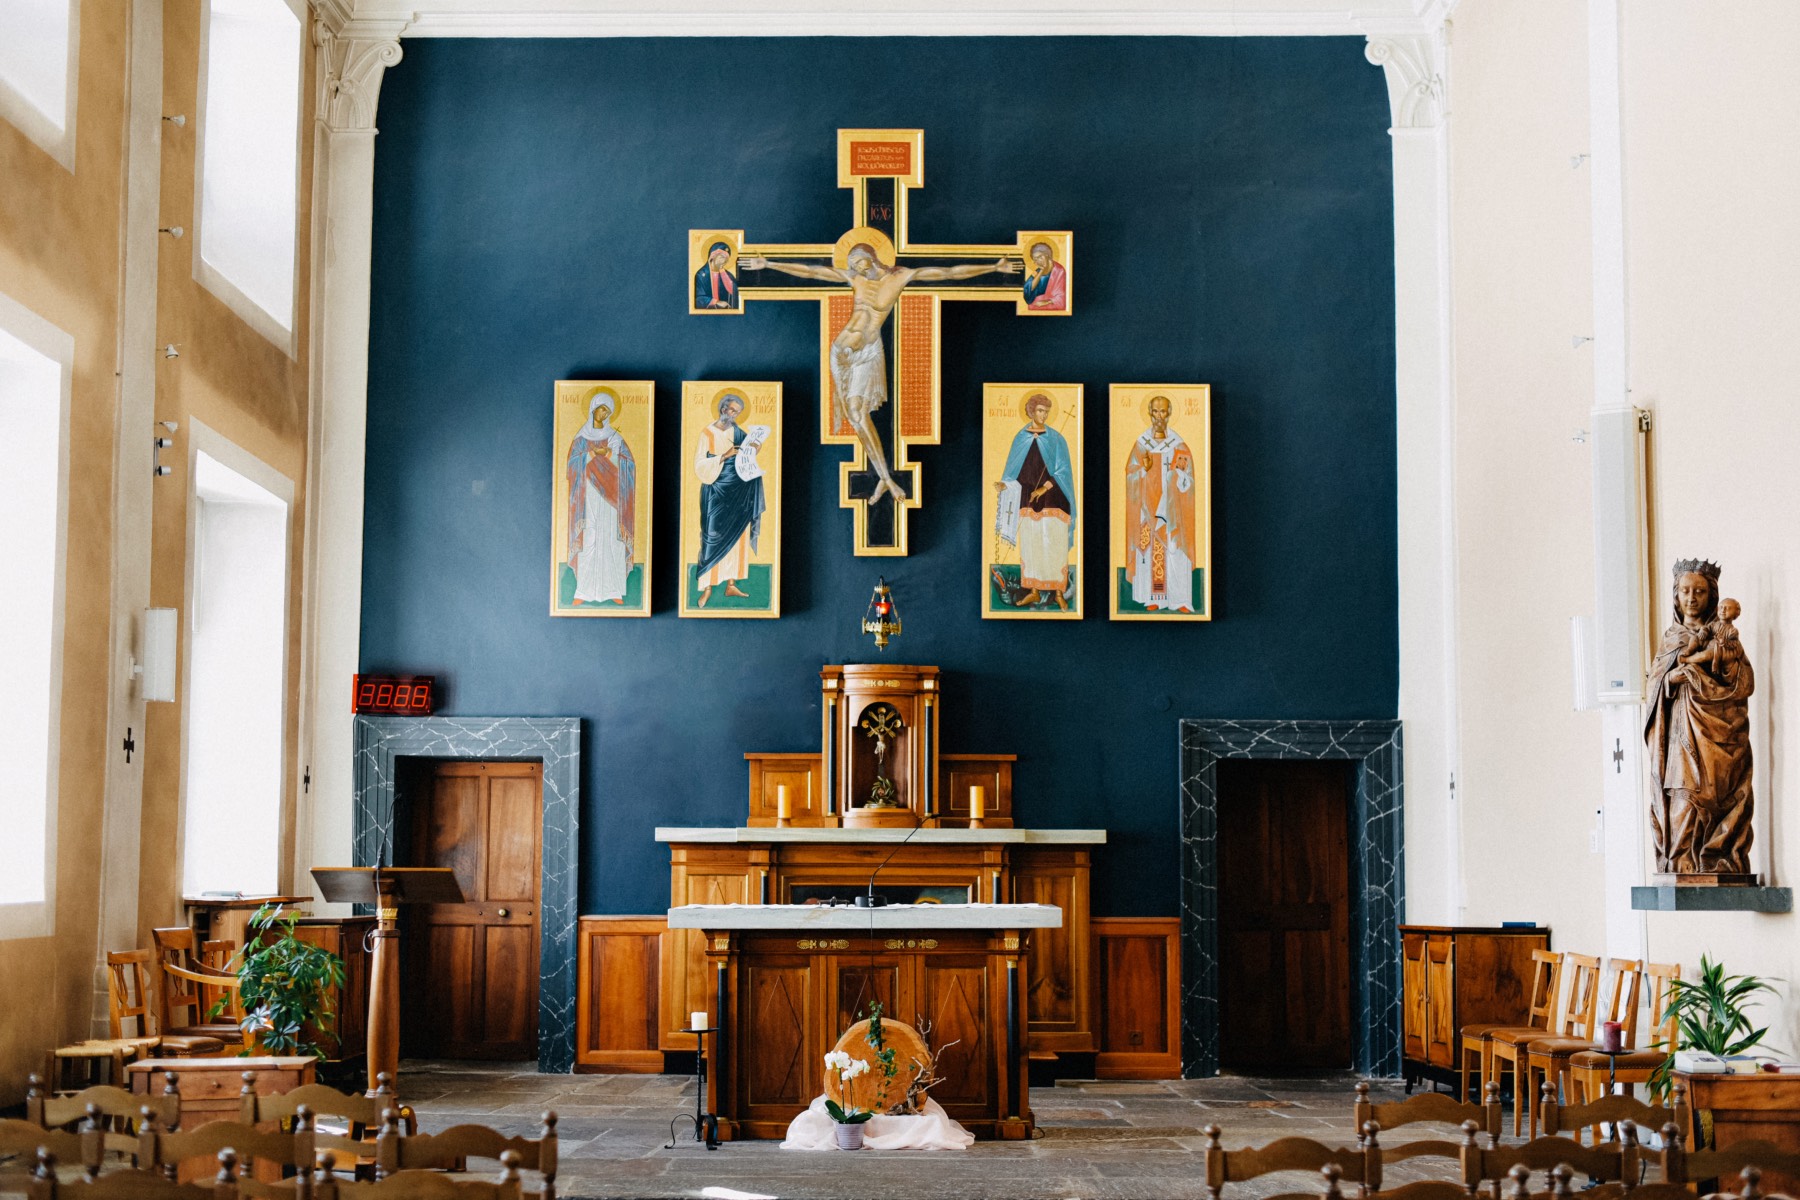 A chapel interior with a wooden altar and Medieval style paintings